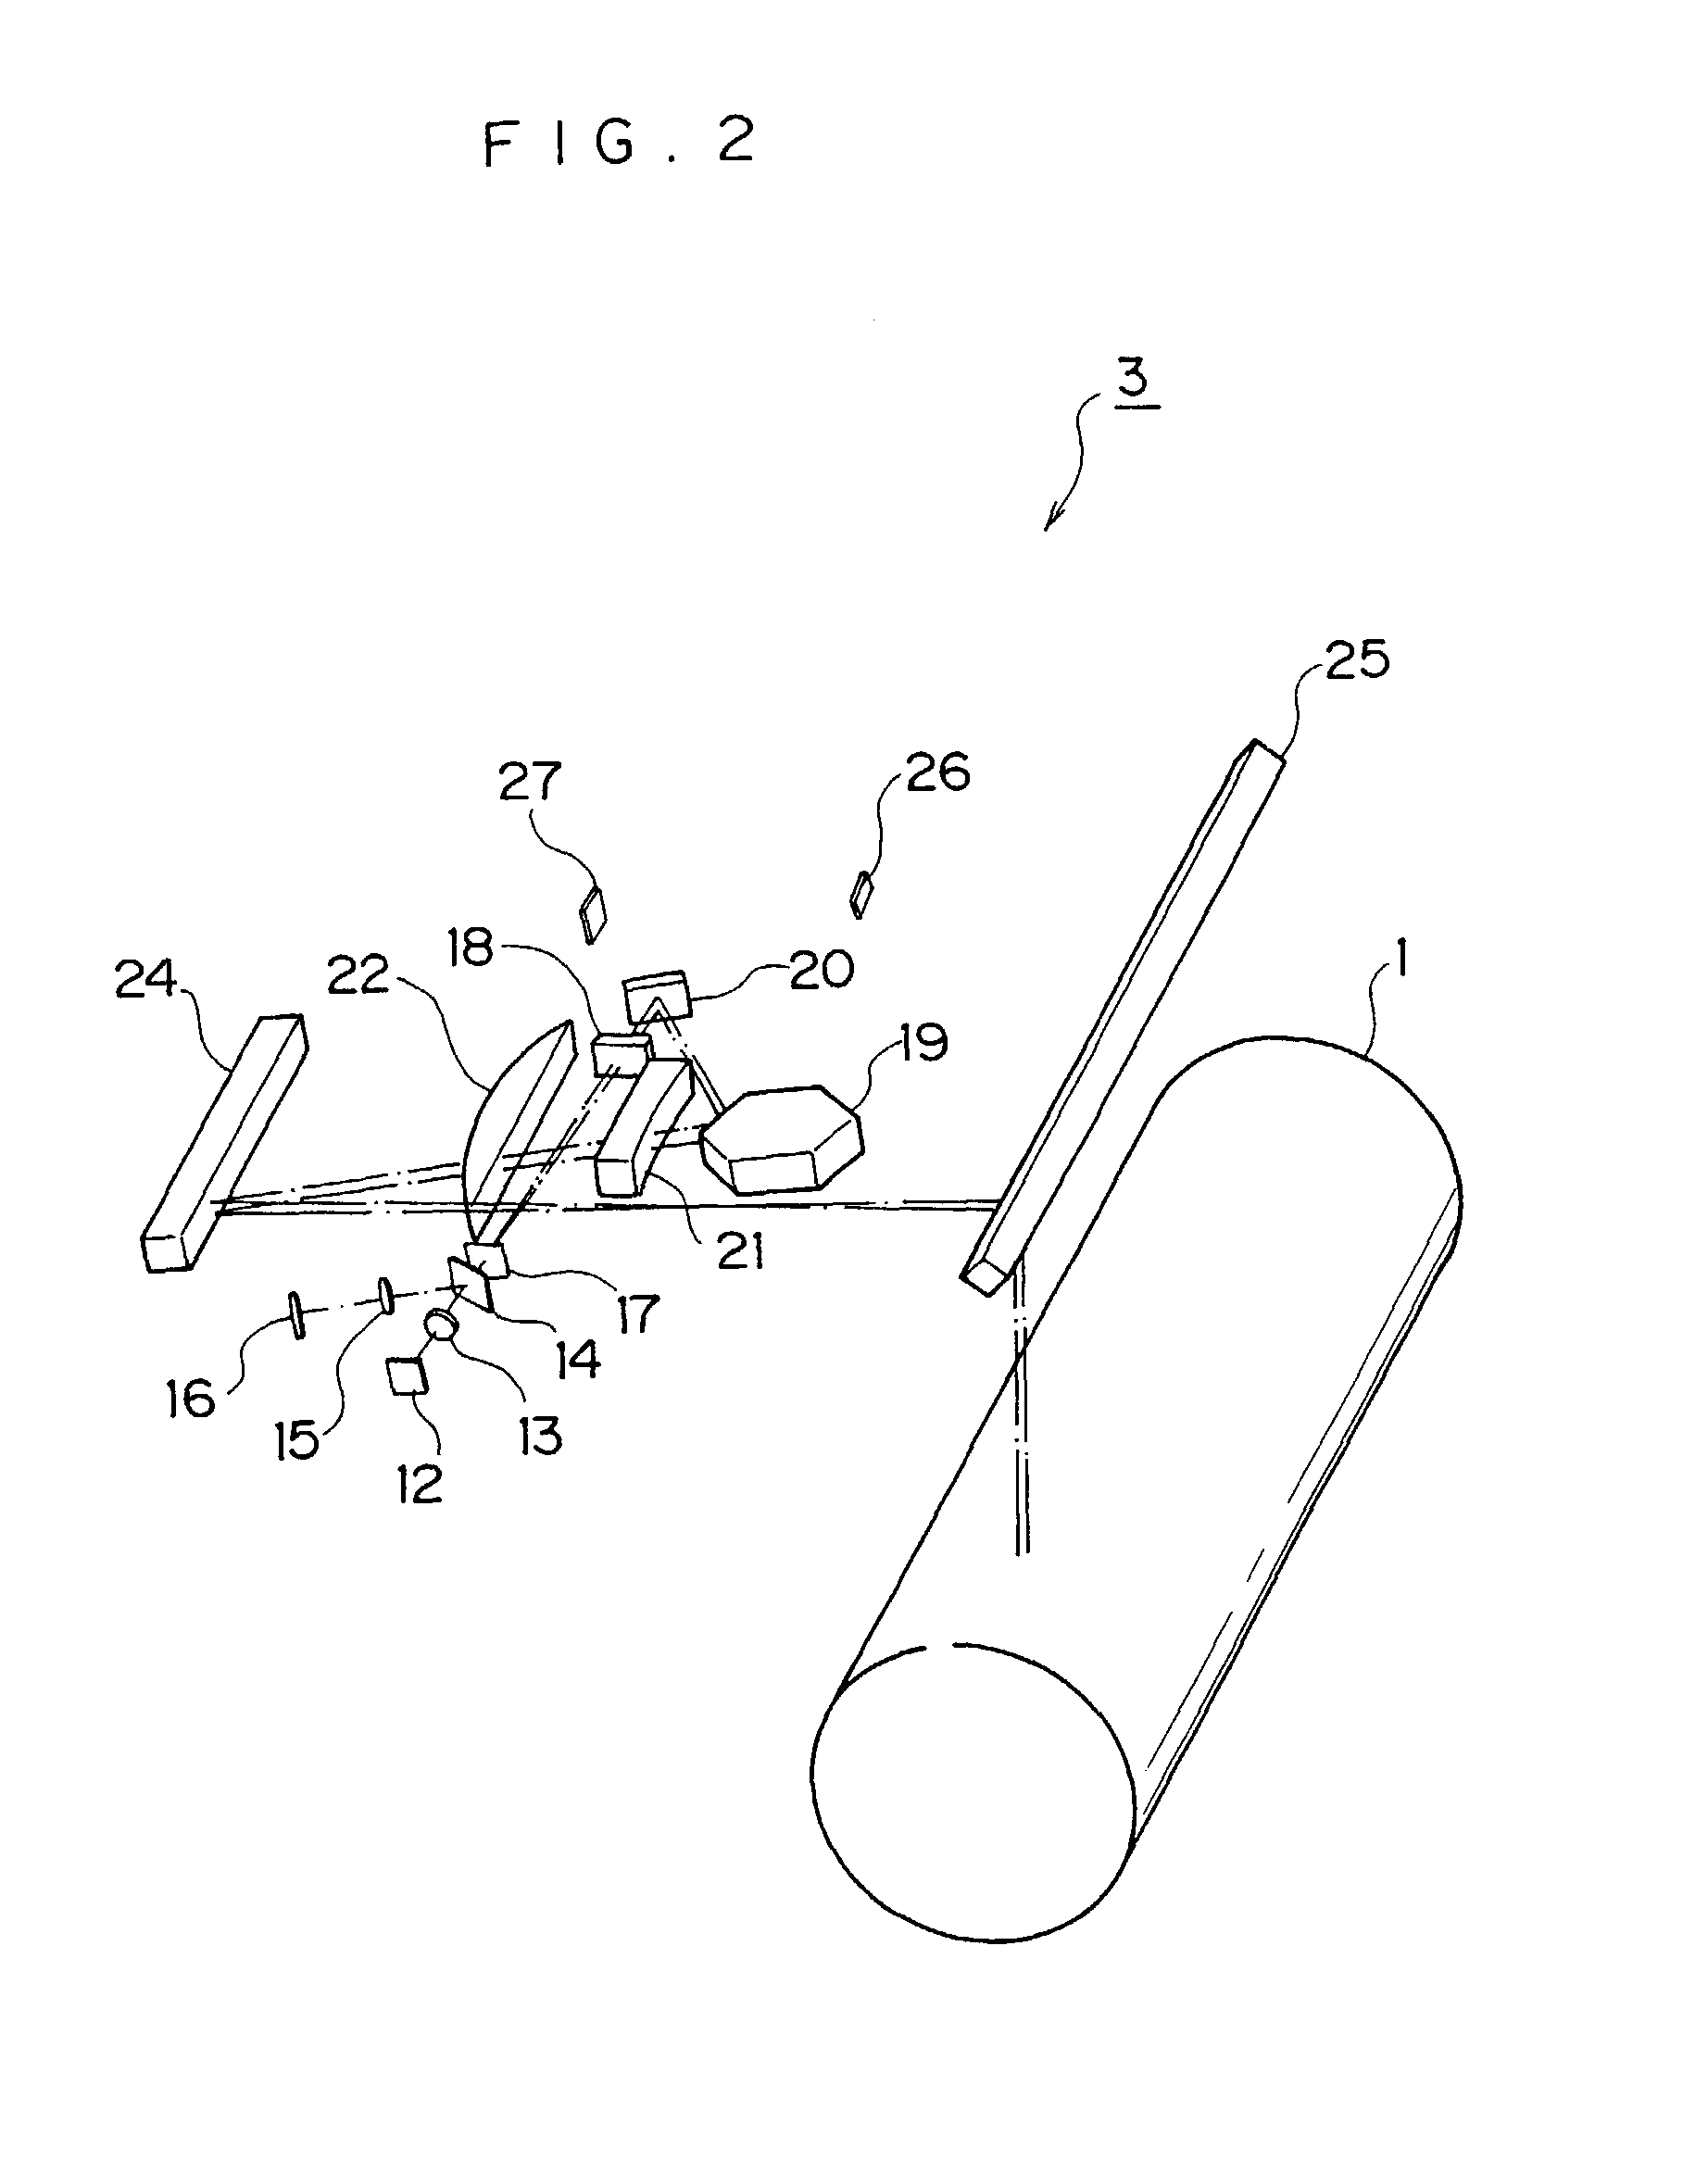 Method and apparatus for reducing the visibility of streaks in images generated using scanning techniques